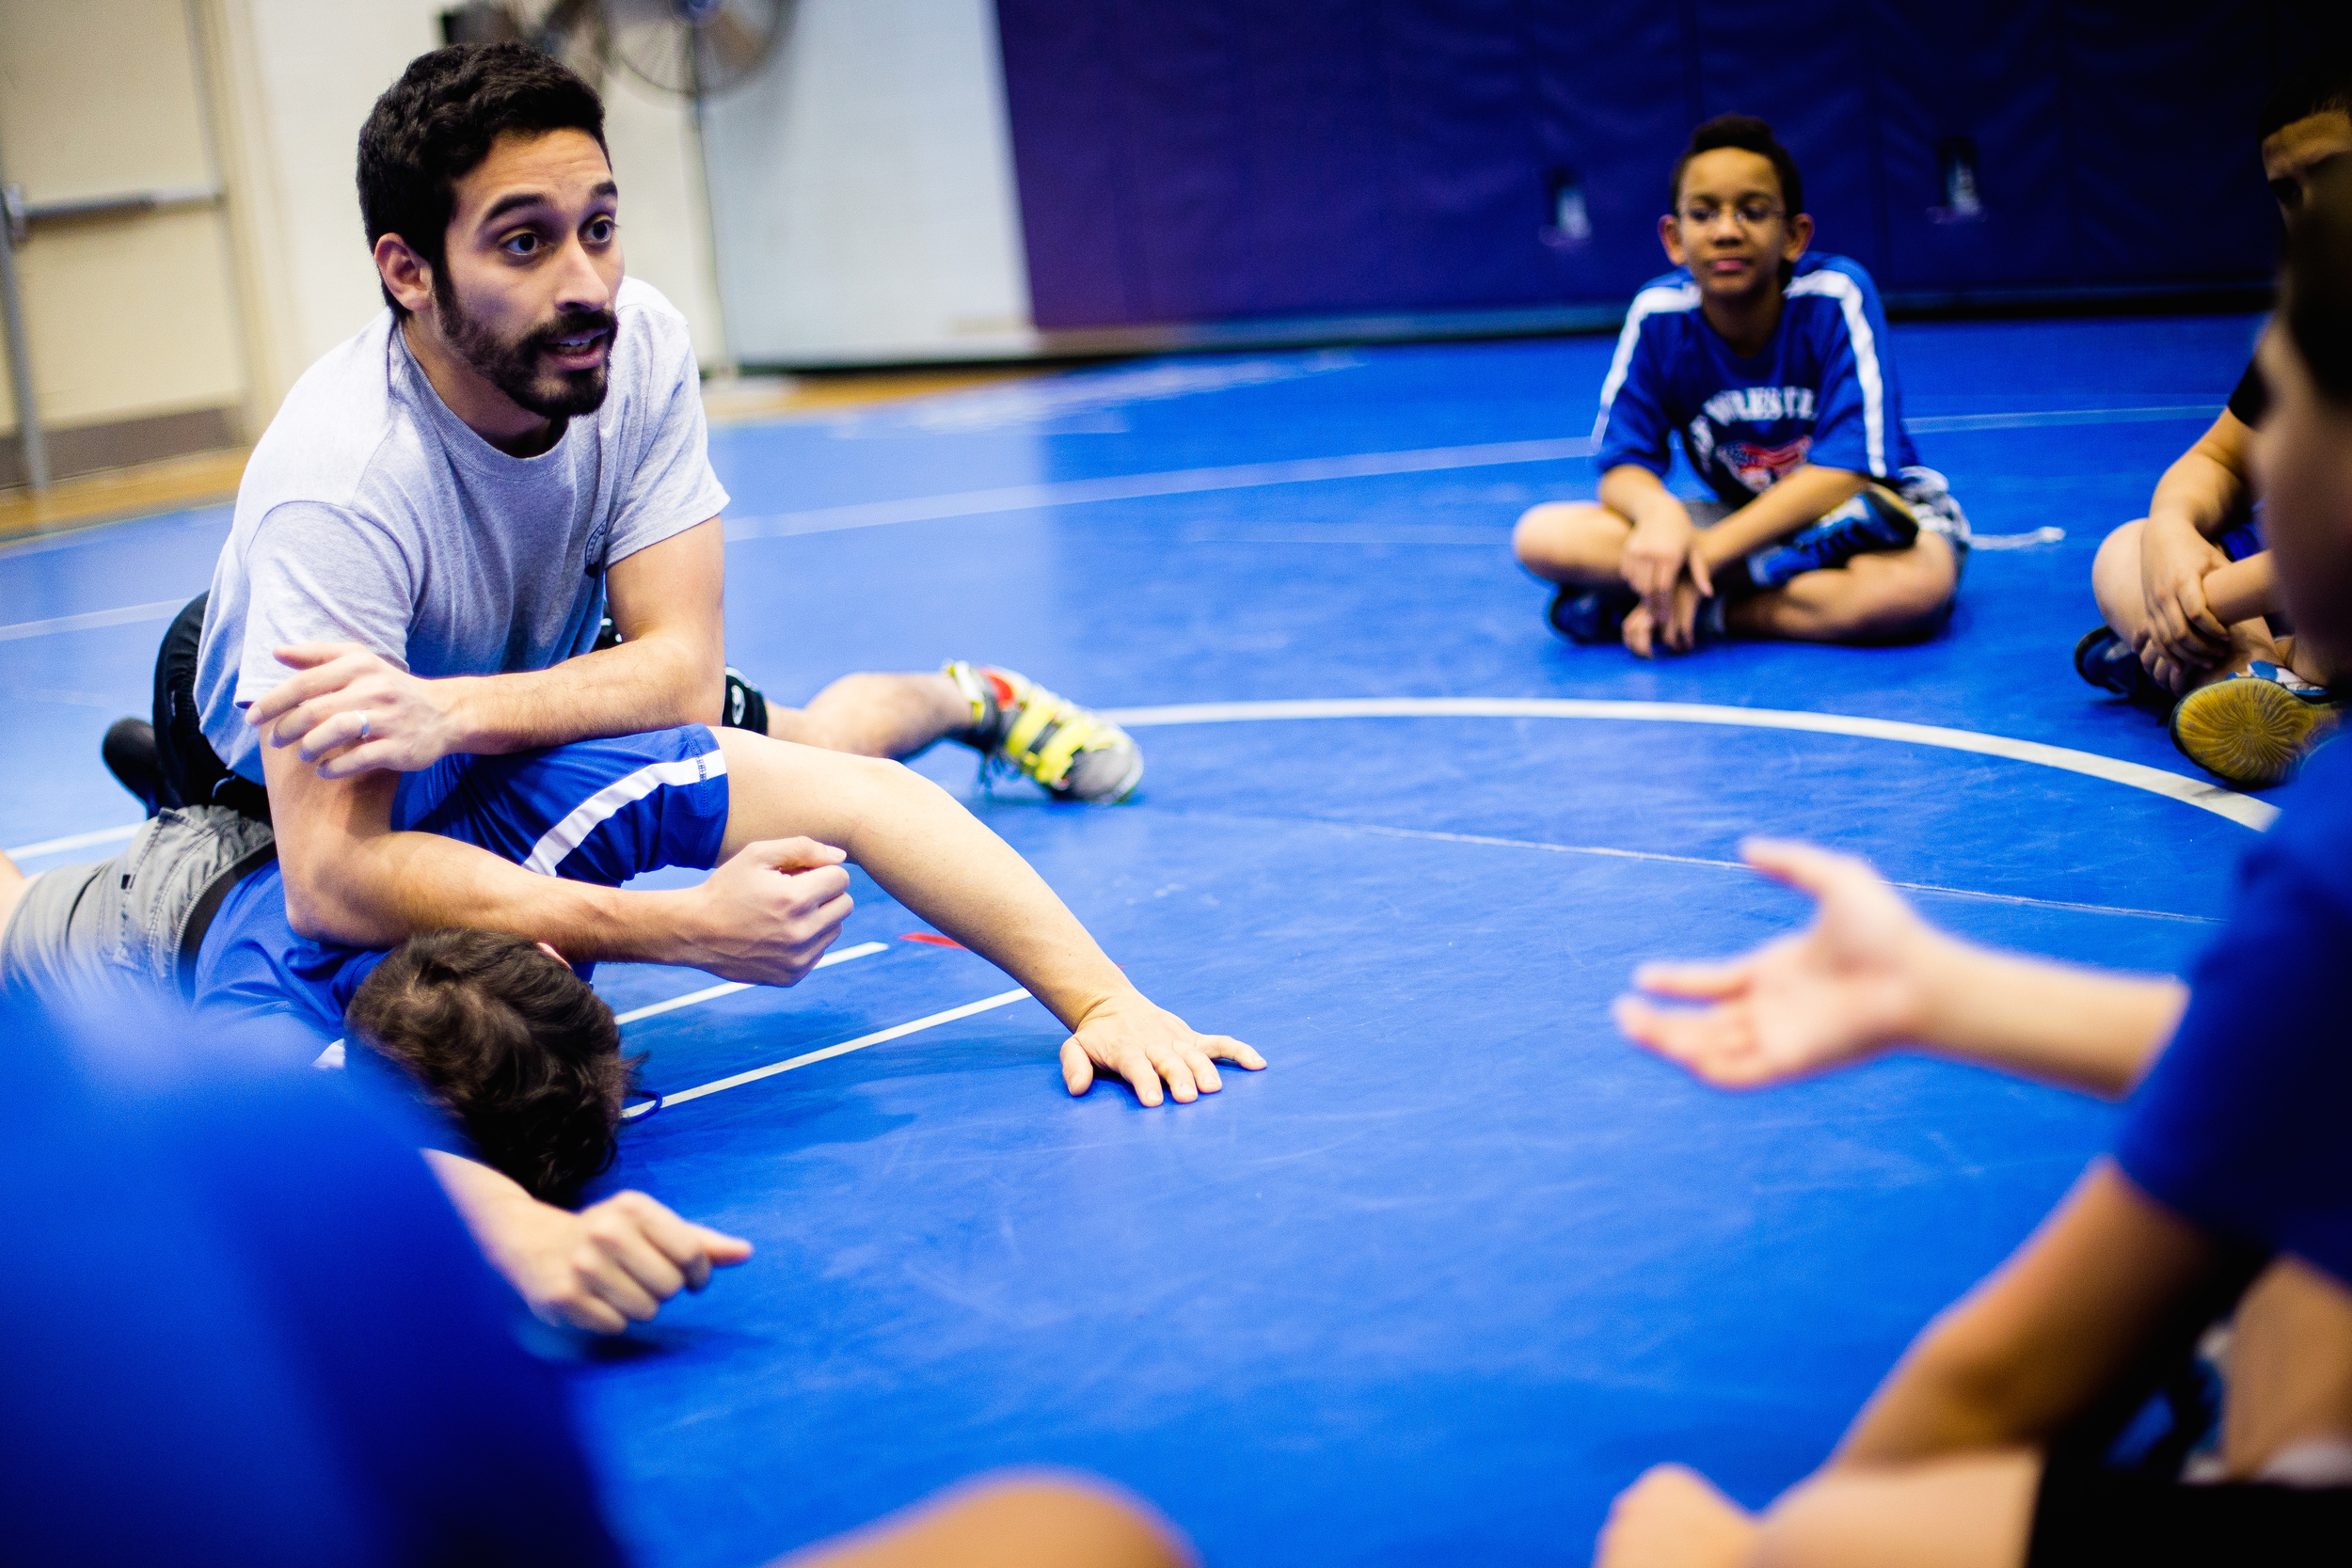 Boston Youth wrestling trainging on the 27th of Feb, 2015. Photo by Ann Wang